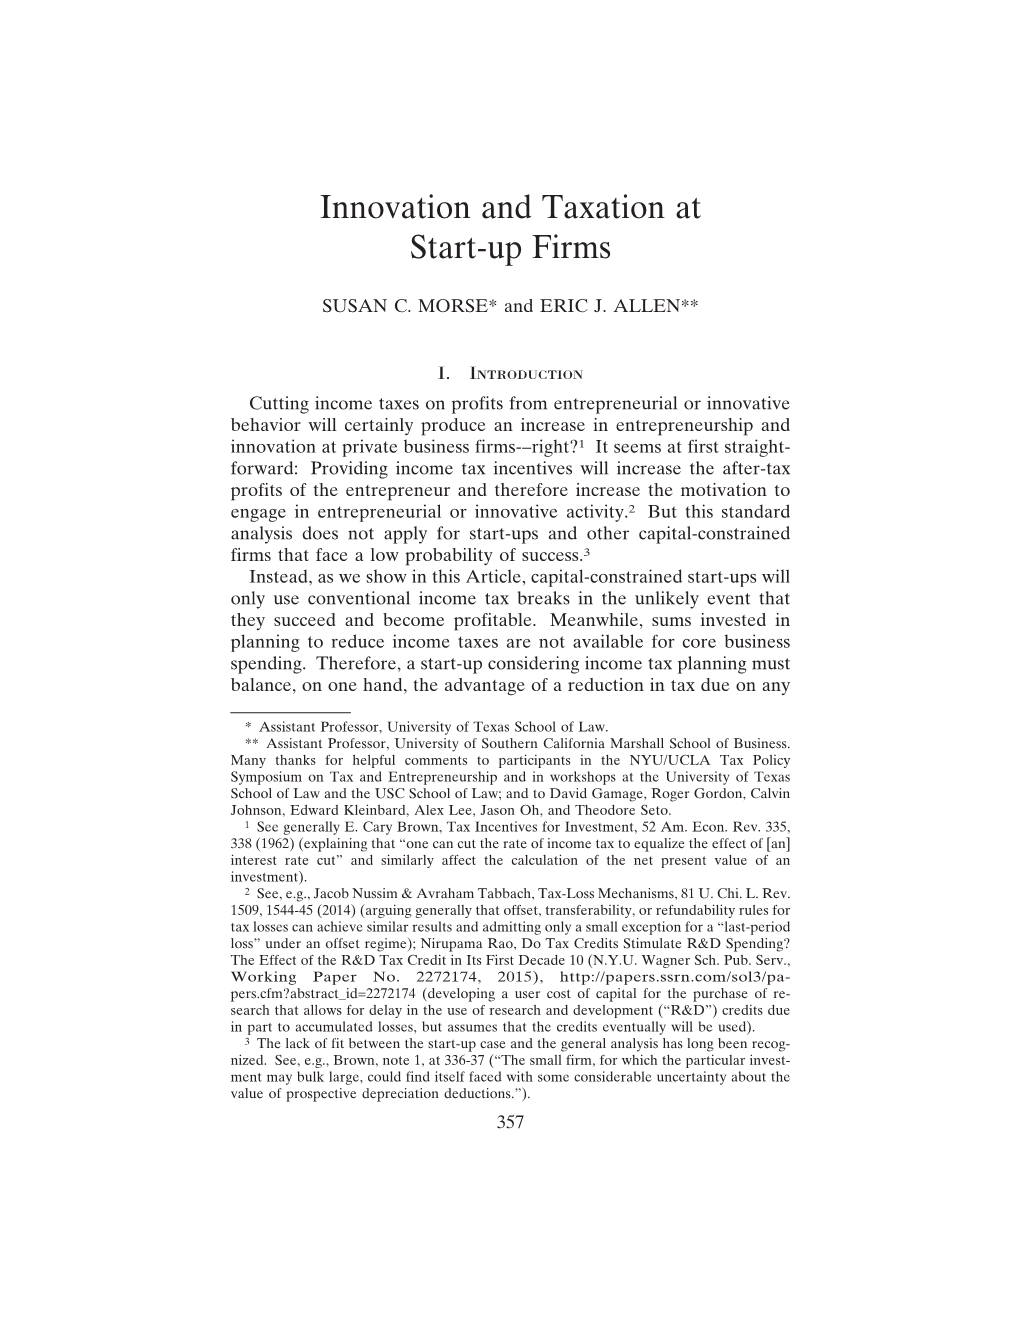 Innovation and Taxation at Start-Up Firms